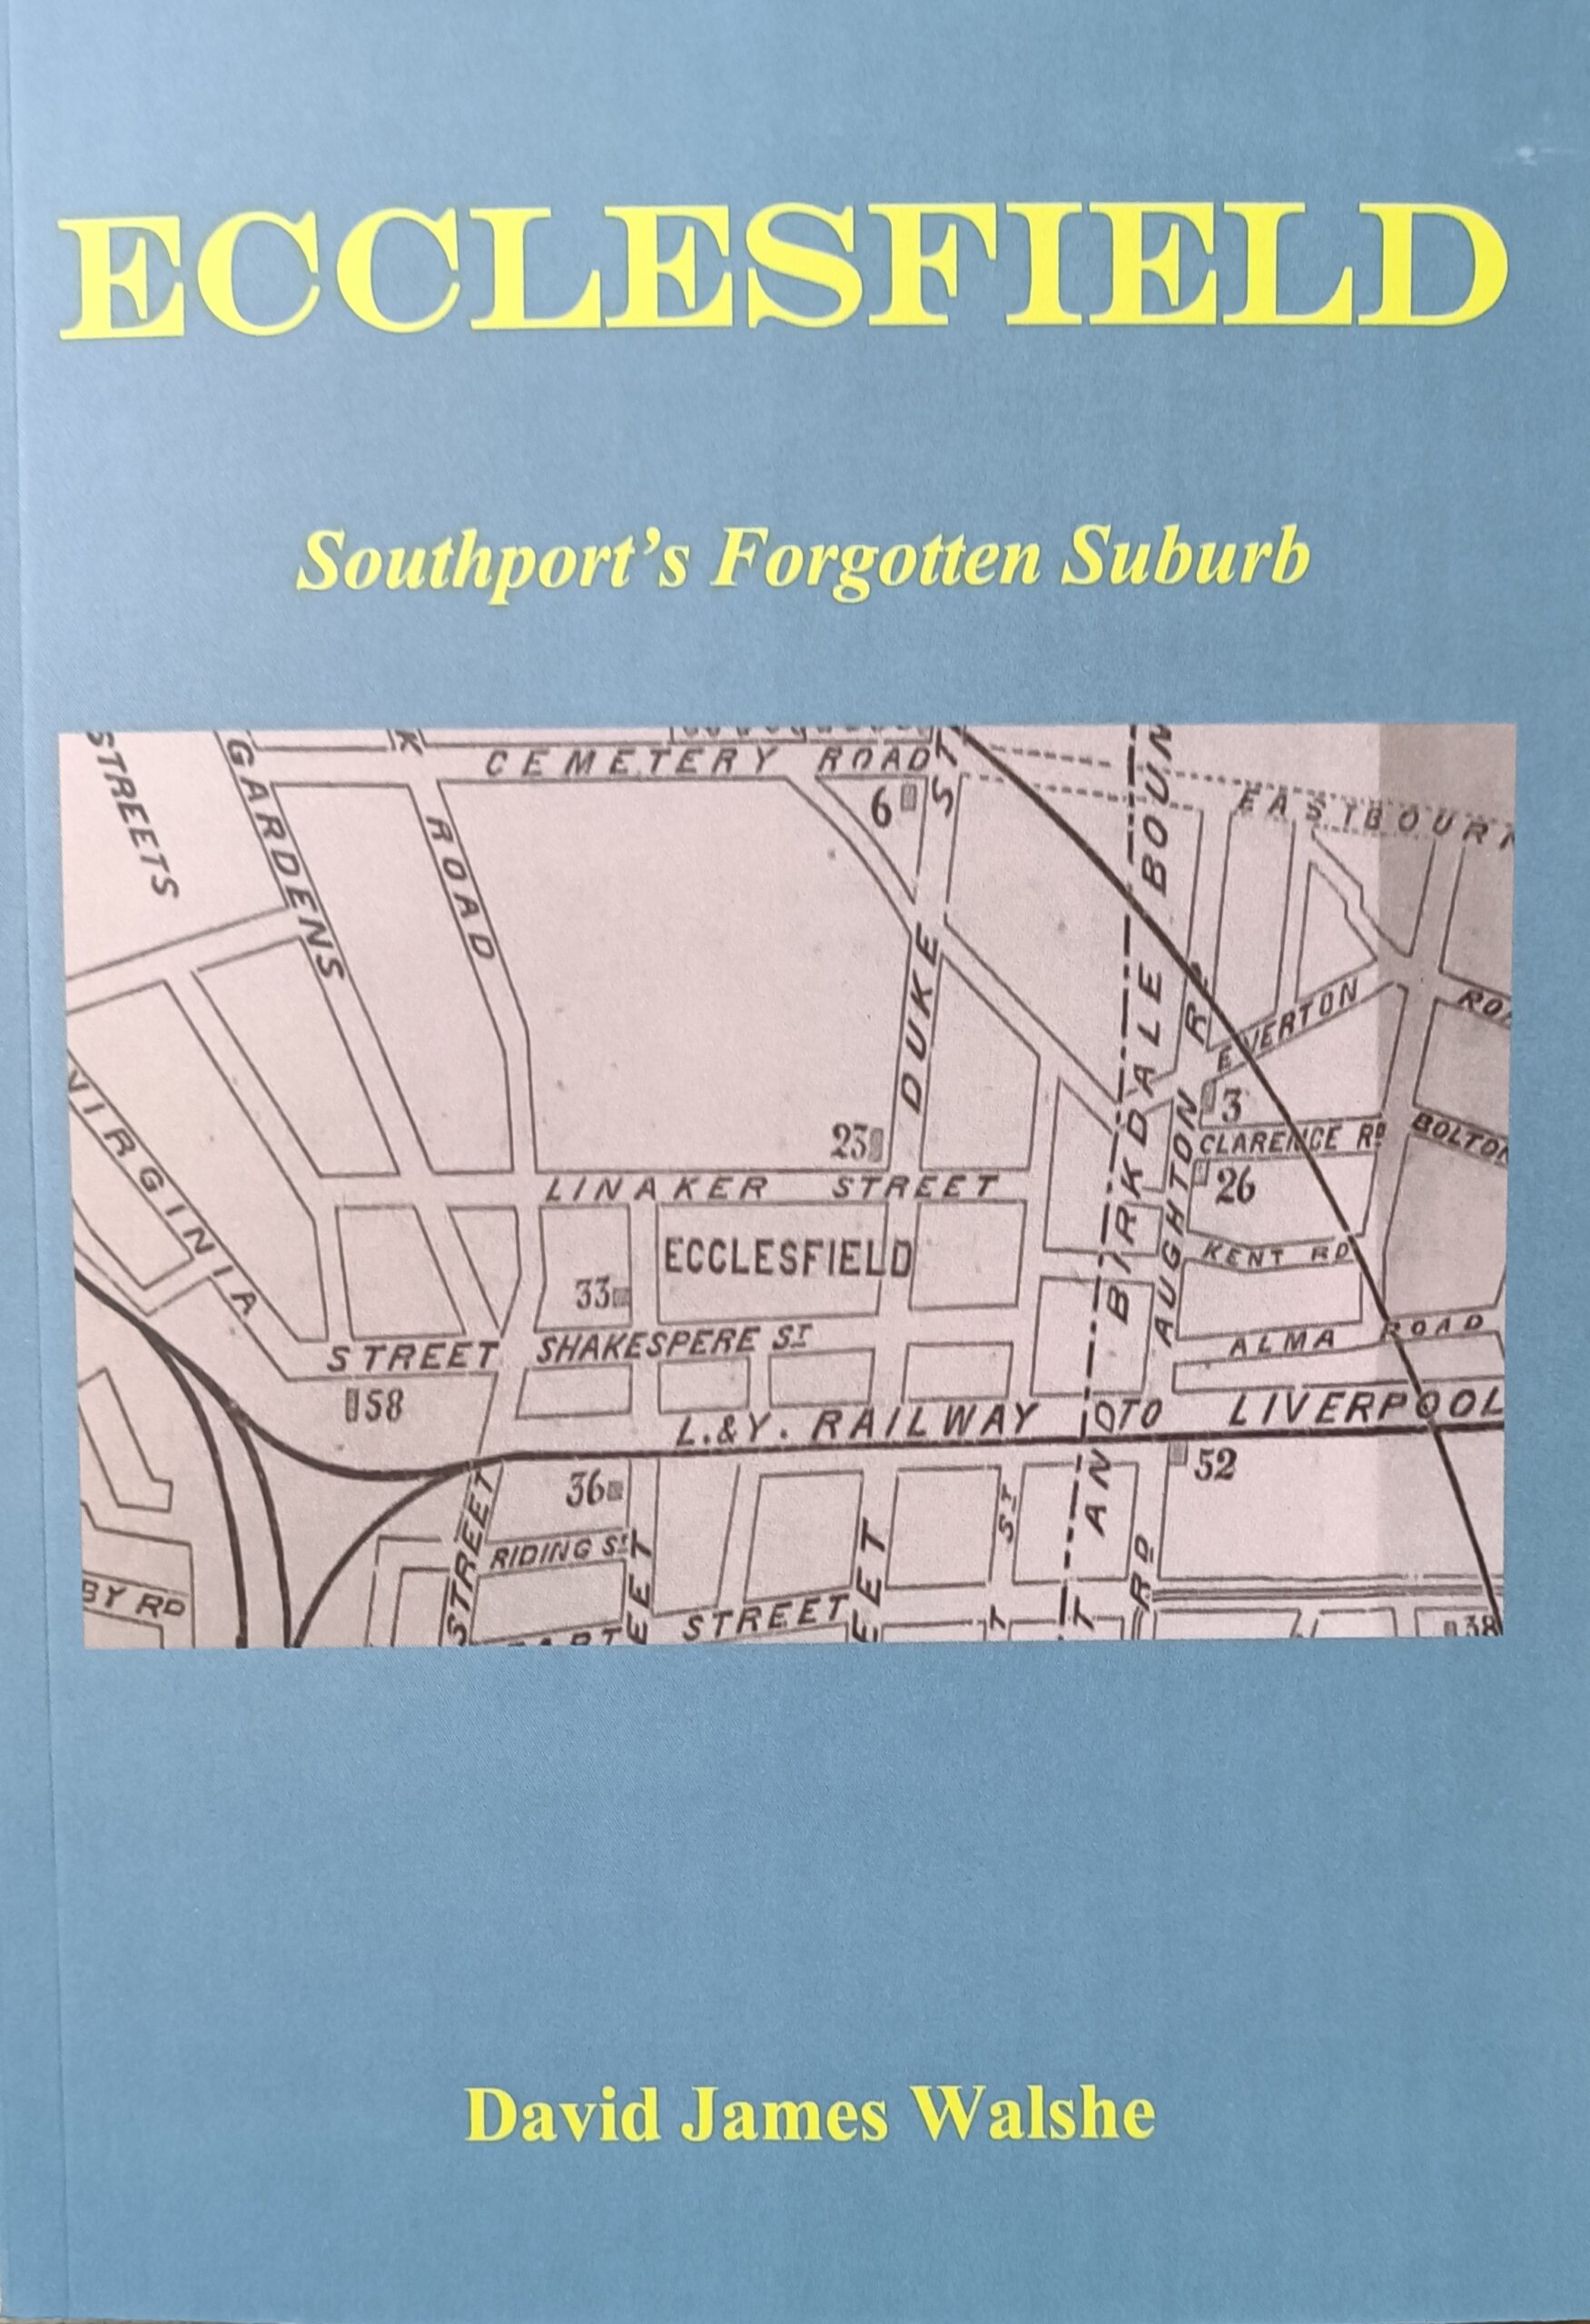 Author David Walshe, who runs the popular Secret Sand Land website and social media pages, has just written a new book, Ecclesfield - Southports Forgotten Suburb